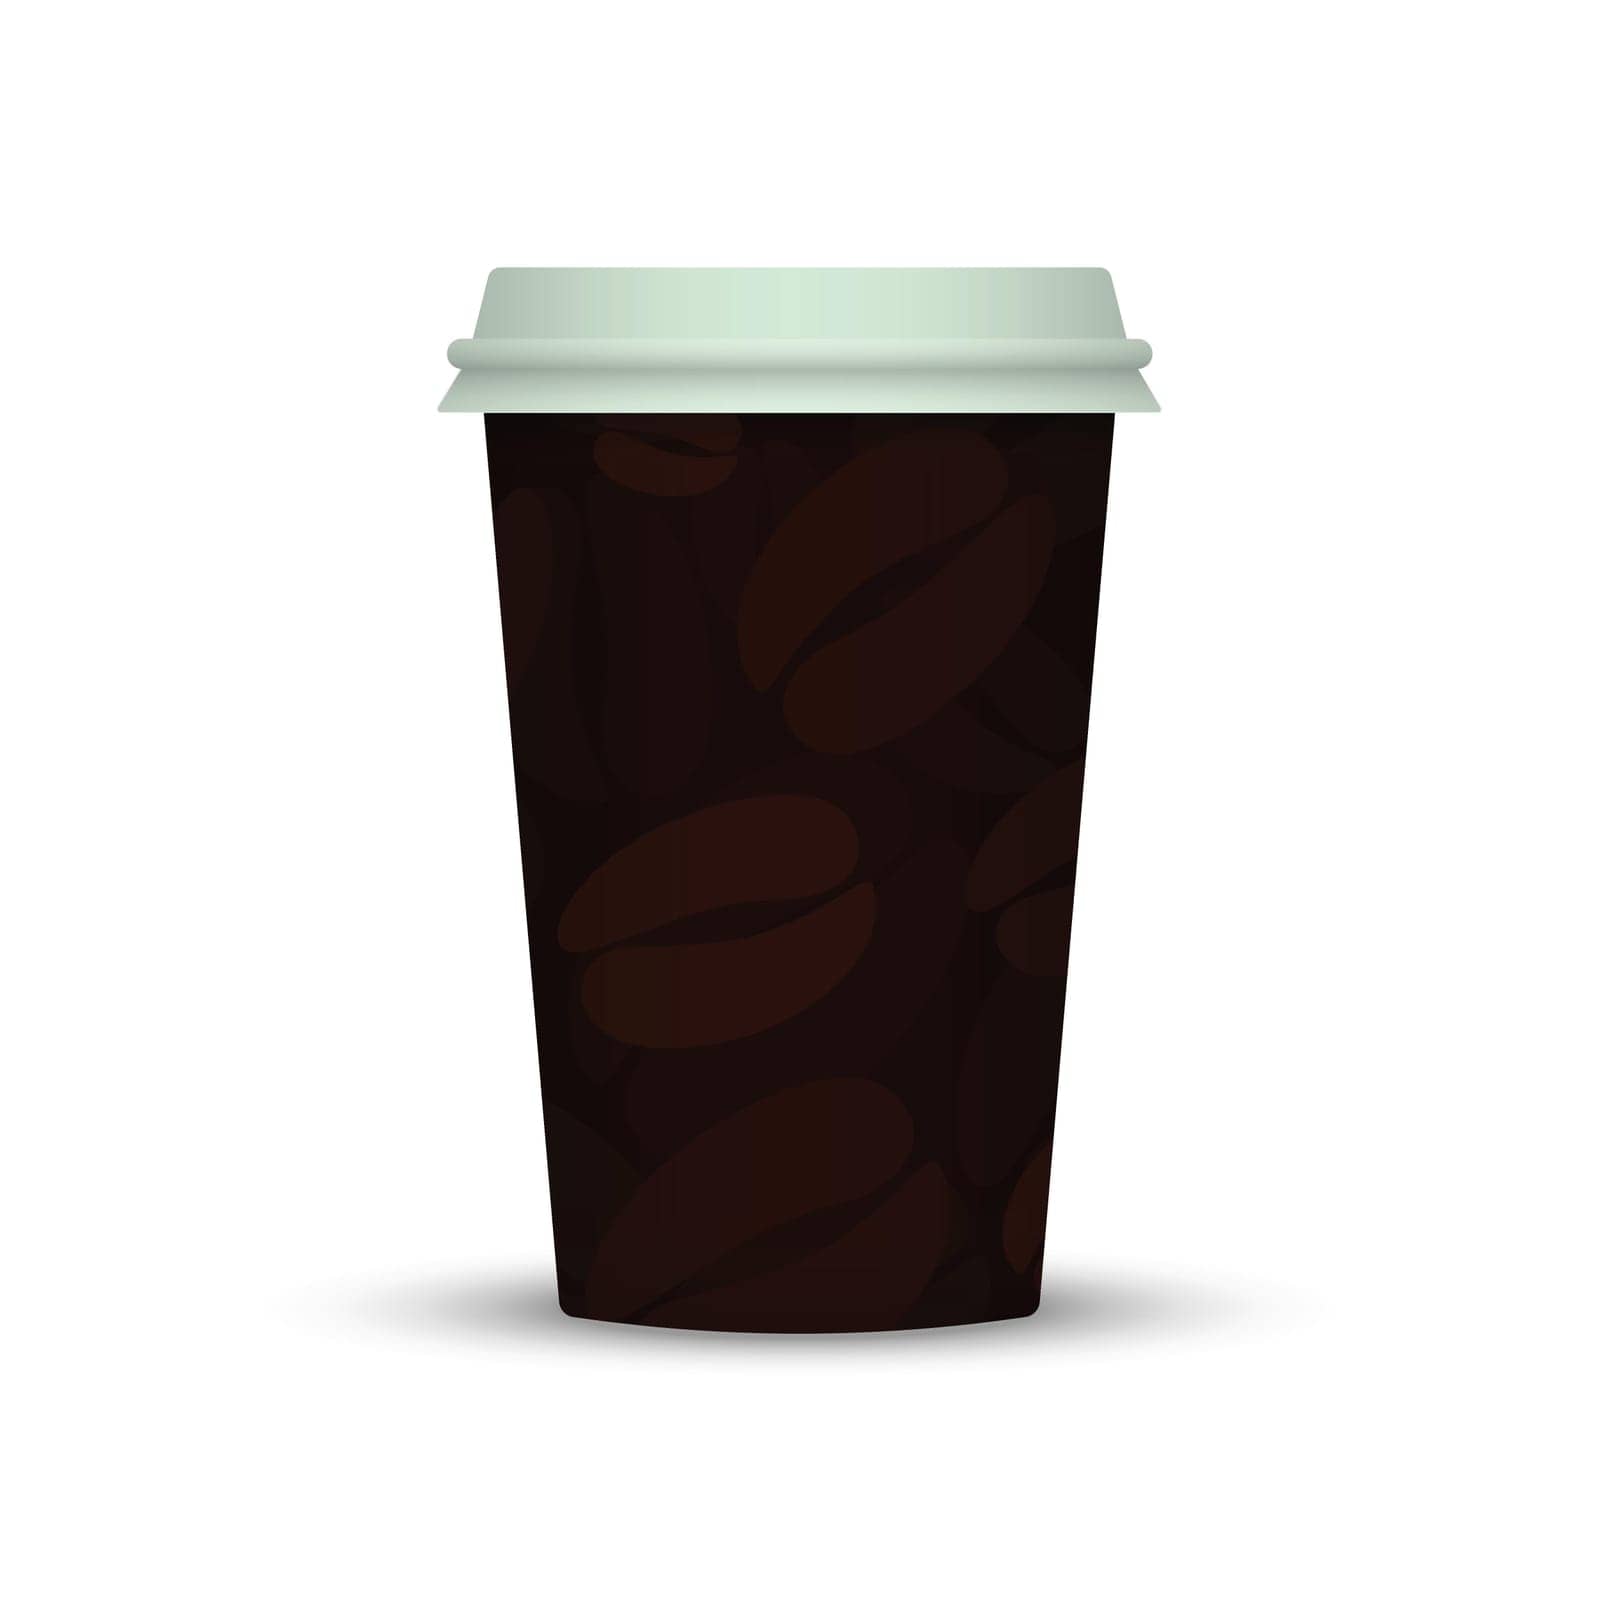 container,mobility,away,shadow,line,lid,icon,cappuccino,mocha,takeout,hot,long,latte,cover,caffeine,paper,flat,decaf,beverage,vector,bean,energy,espresso,set,refreshment,break,restaurant,smoke,holder,portable,brown,takeaway,food,drink,disposable,morning,take,fast,cafe,liquid,coffee,fresh,breakfast,mug,object,cup